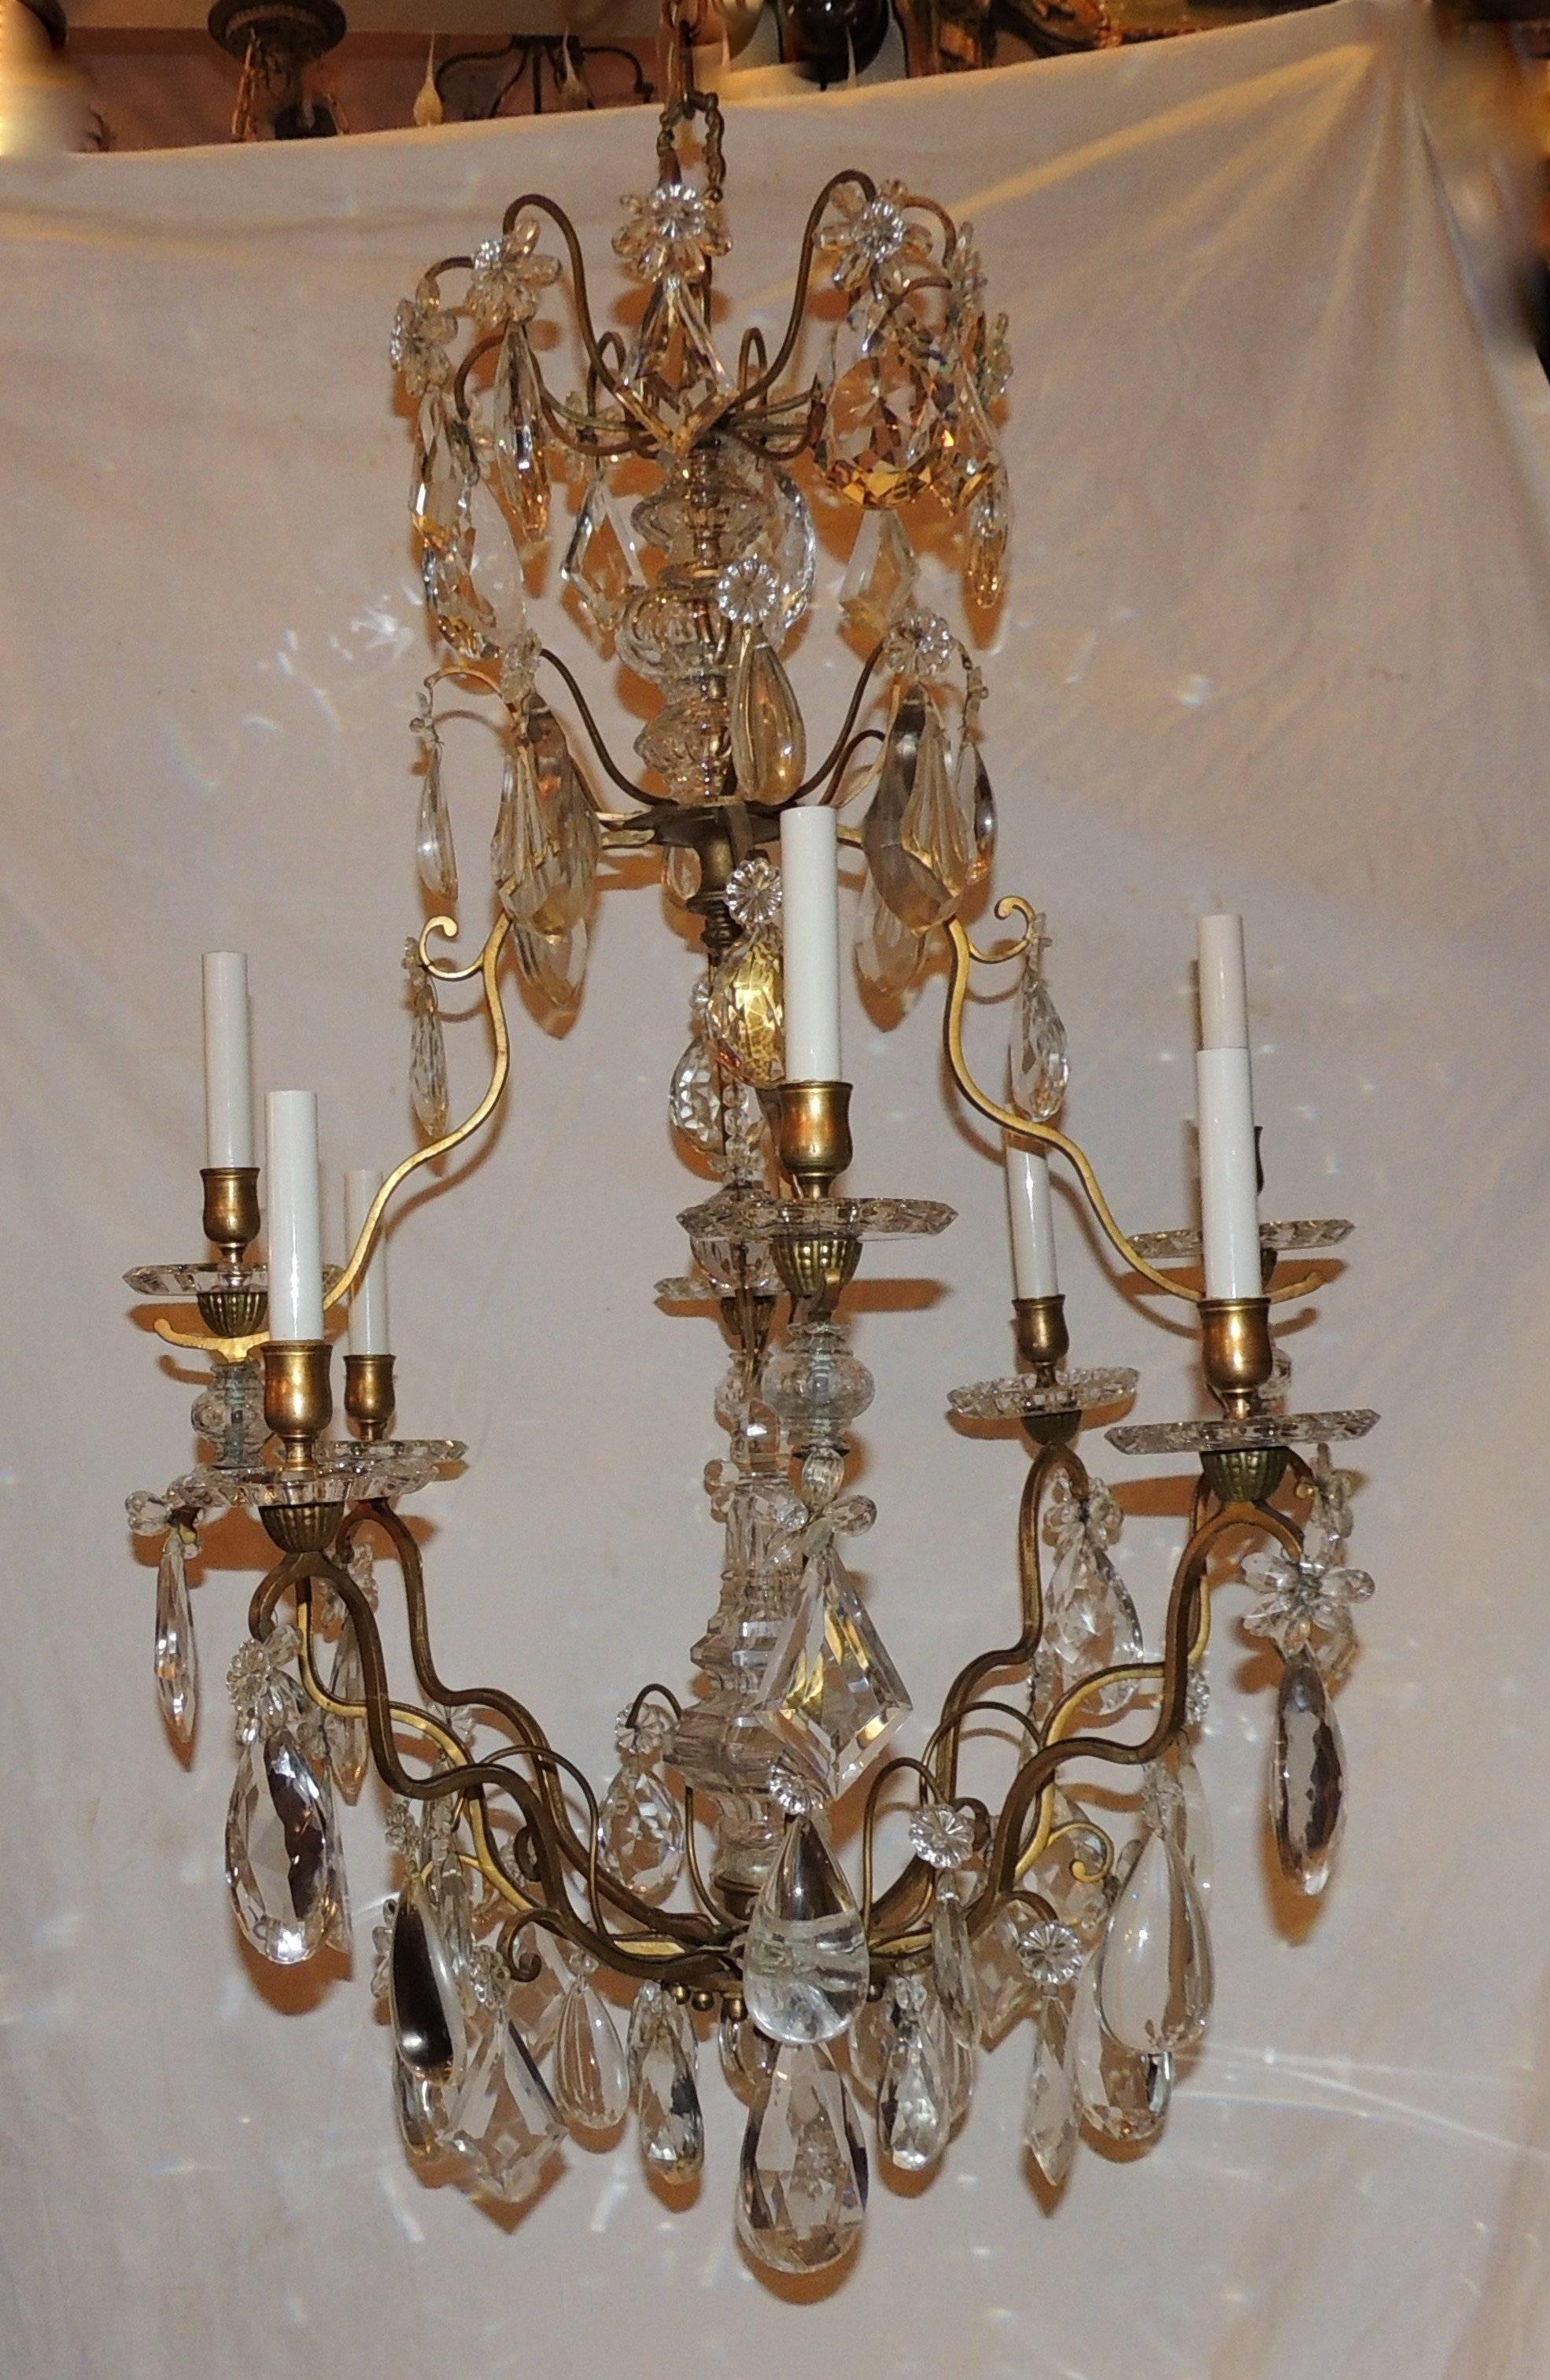 Wonderful Signed Baccarat French doré Bronze eight-light crystal chandelier
with crystal bobeche, crystal center finial and crystal drop.

Measures: 46